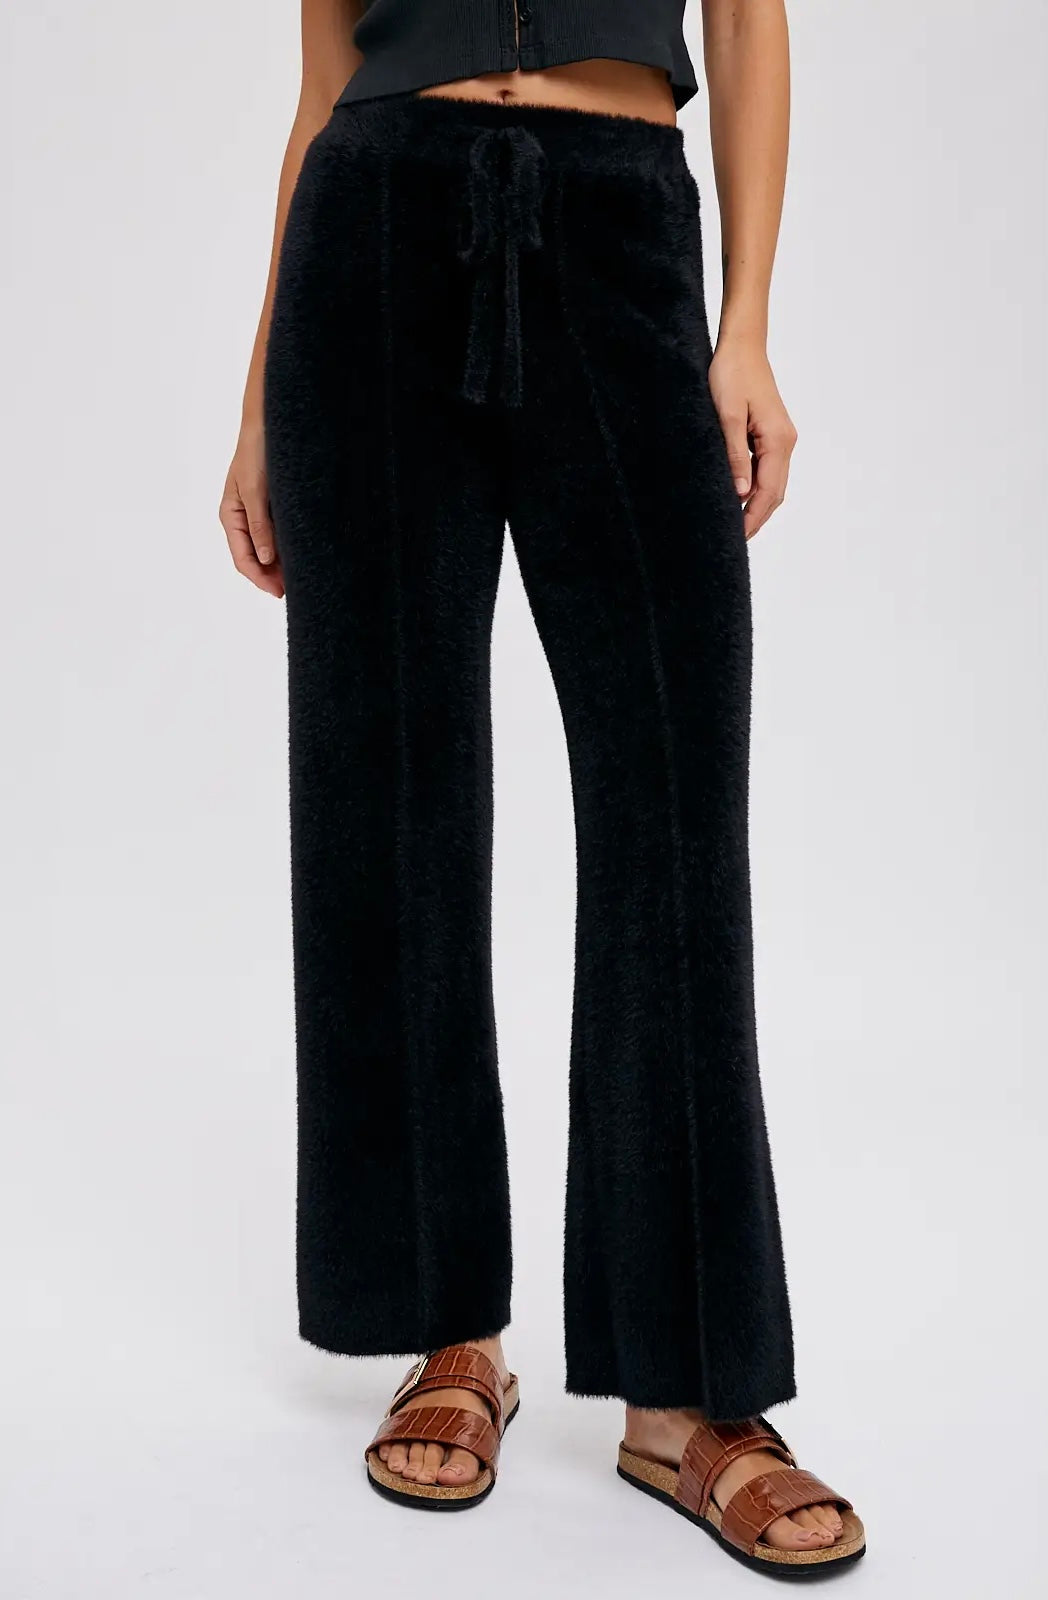 Bluivy Fuzzy Knit Lounge Pants